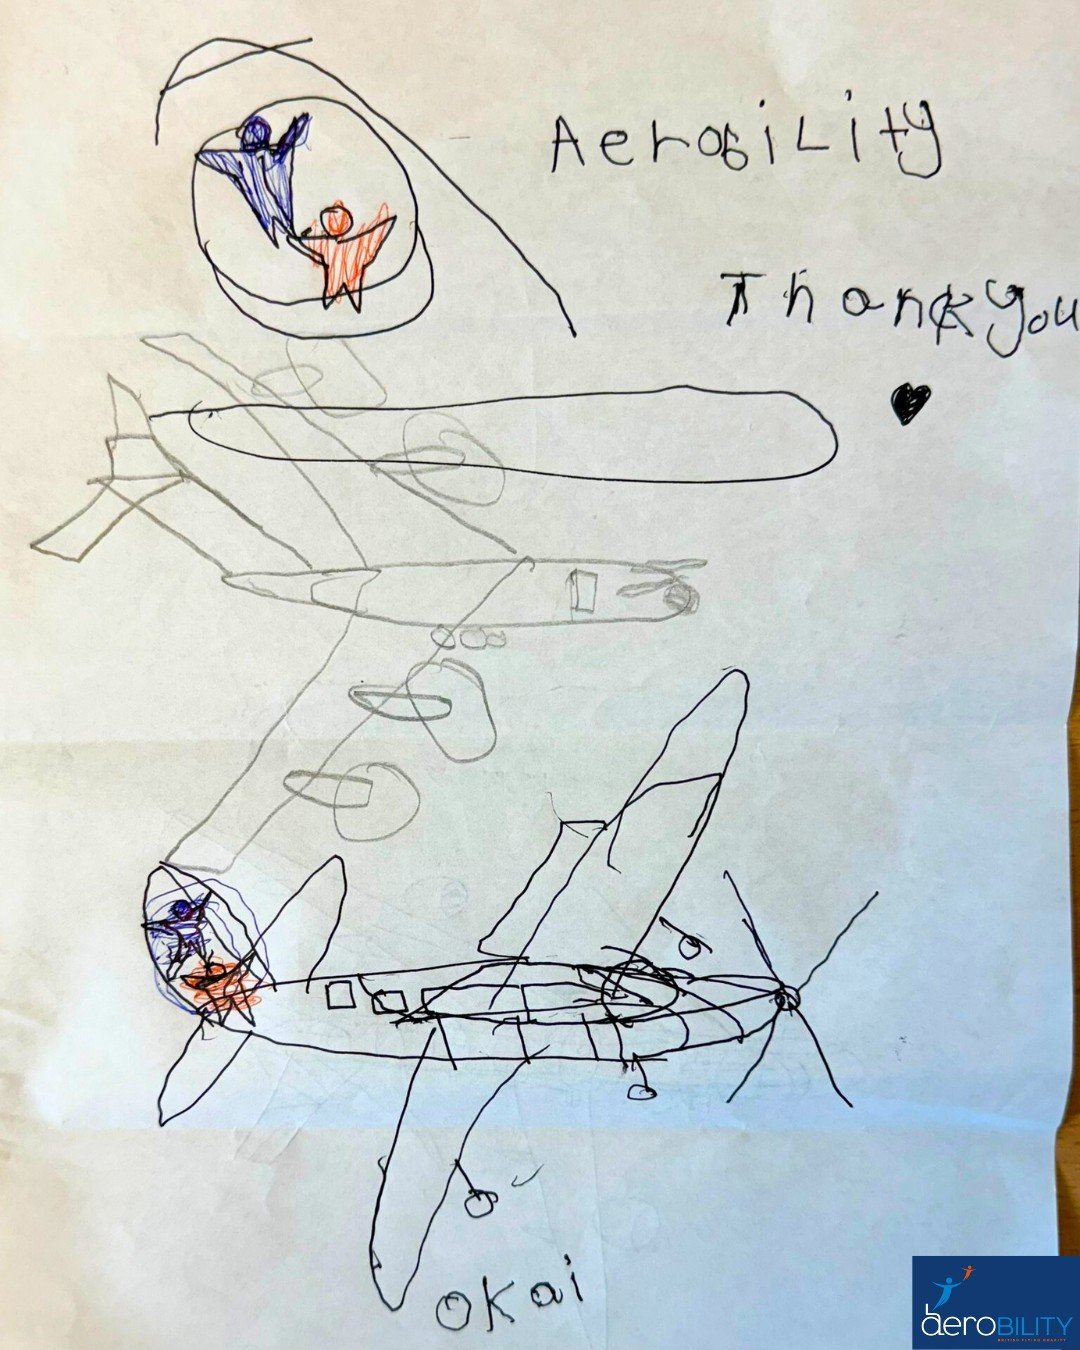 We'd love to share this fantastic drawing we received from one of our VAE students. Thank you Omair for sharing your incredible talent with us! ❤️

#Aerobility #Aviation #Disability #Flying